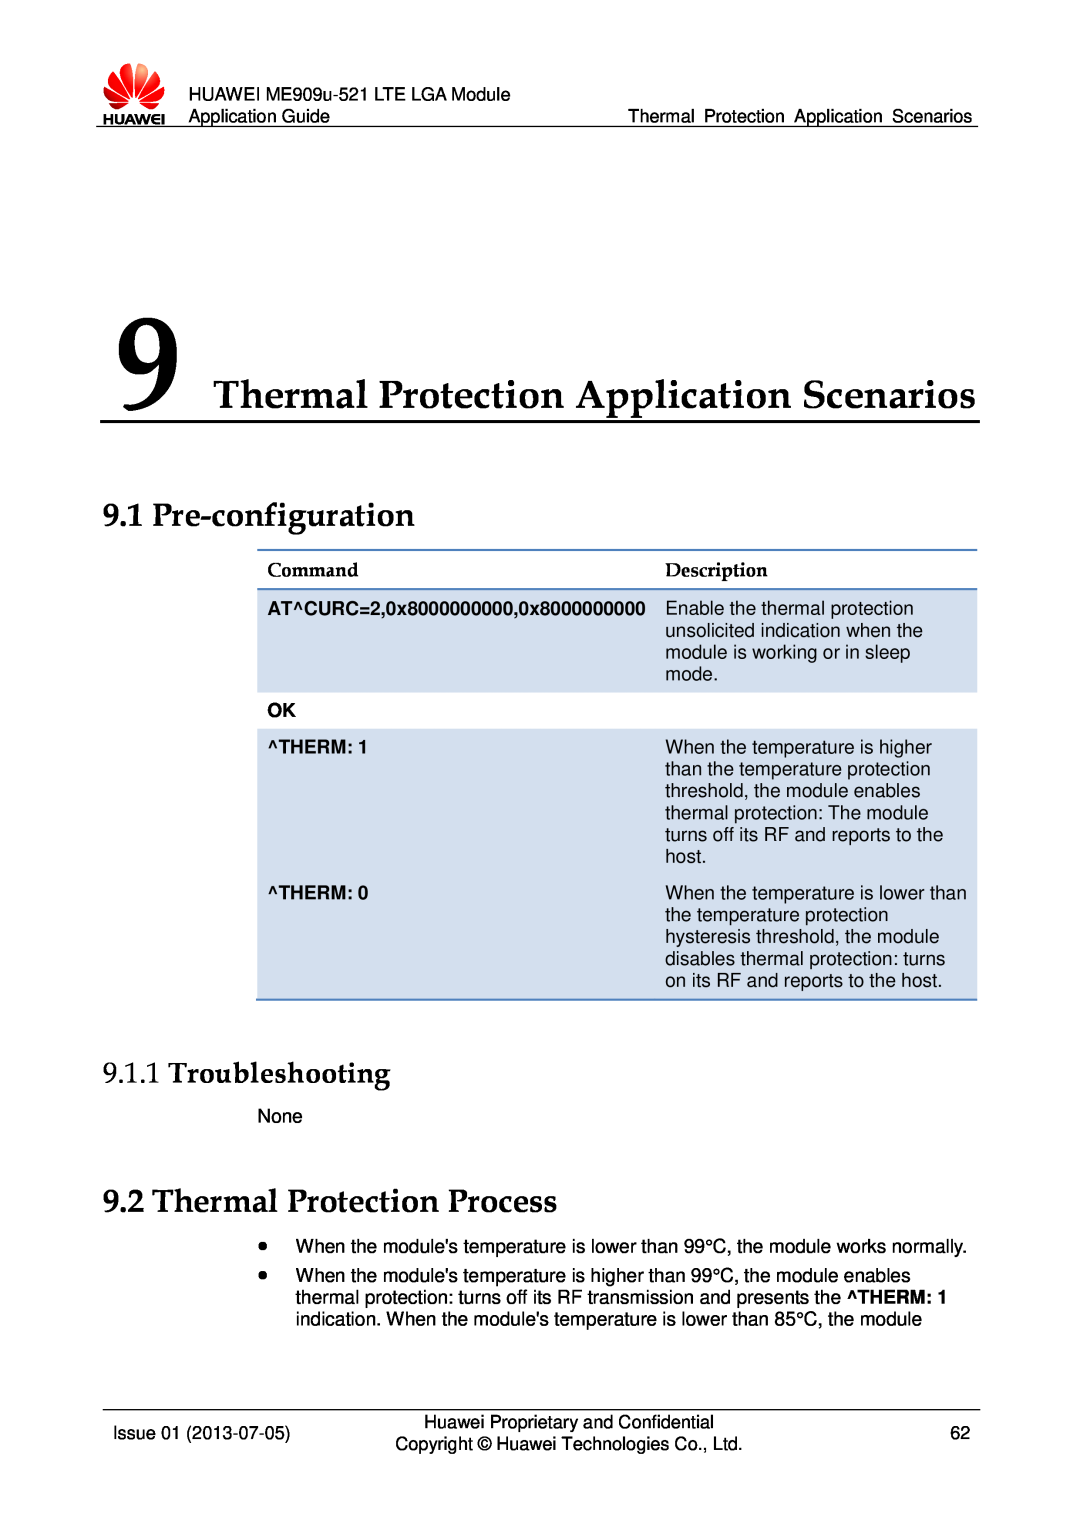 Huawei ME909u-521 Thermal Protection Application Scenarios, Pre-configuration, Thermal Protection Process, Troubleshooting 